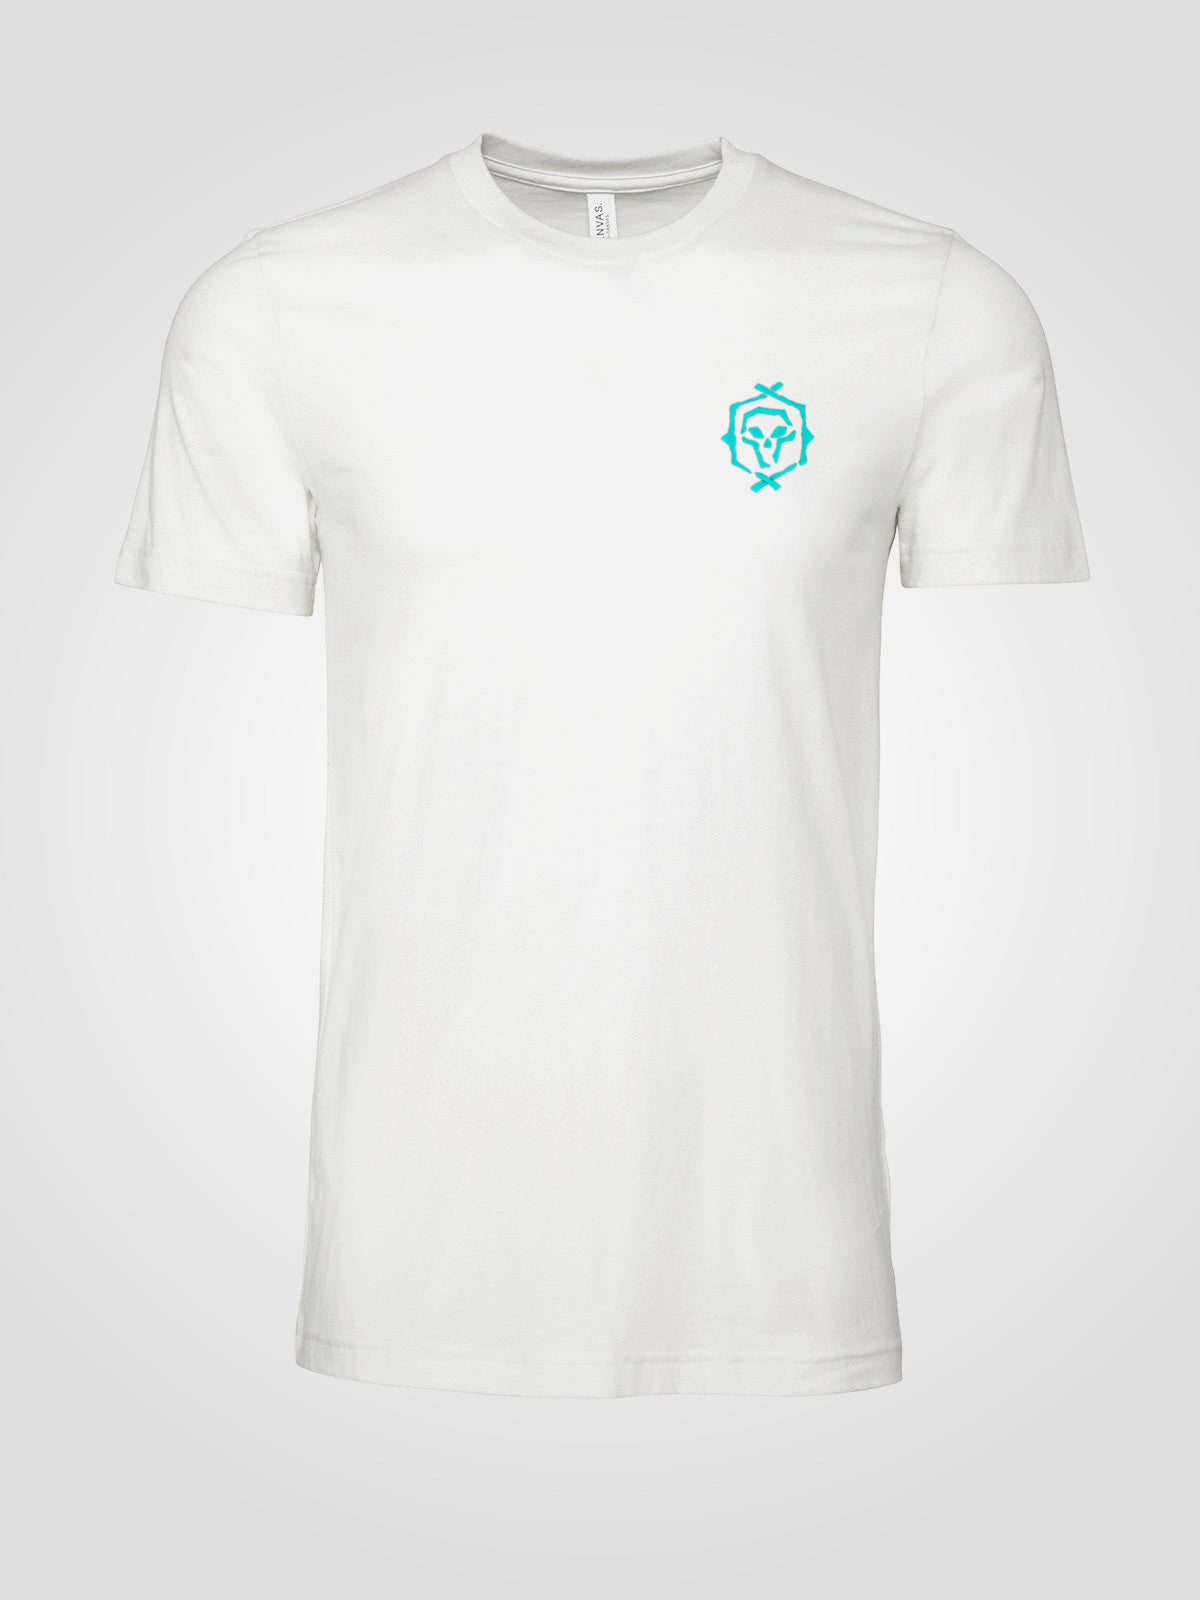 Sea of Thieves Pirate Legend T Shirts - Contour Eco